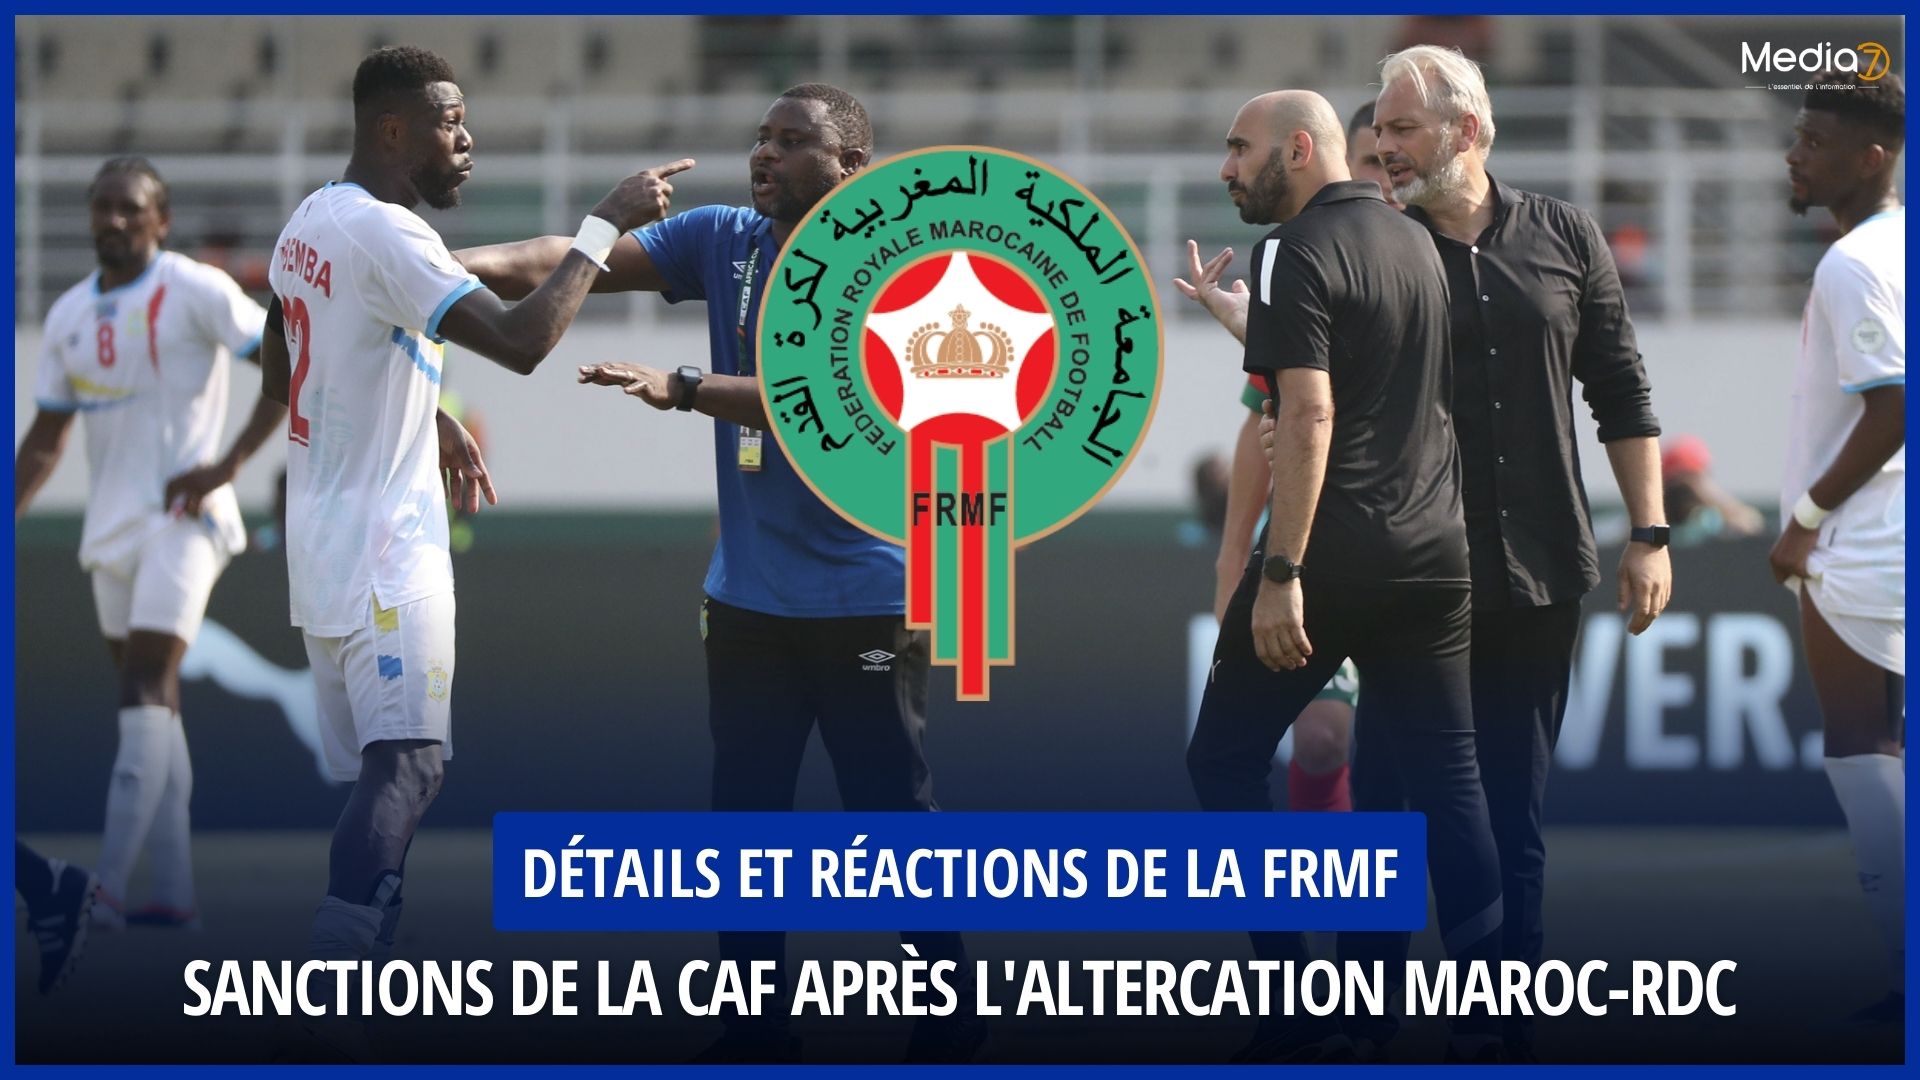 CAF Sanctions after the Morocco-DRC Altercation: Details and Reactions of the FRMF - Media7